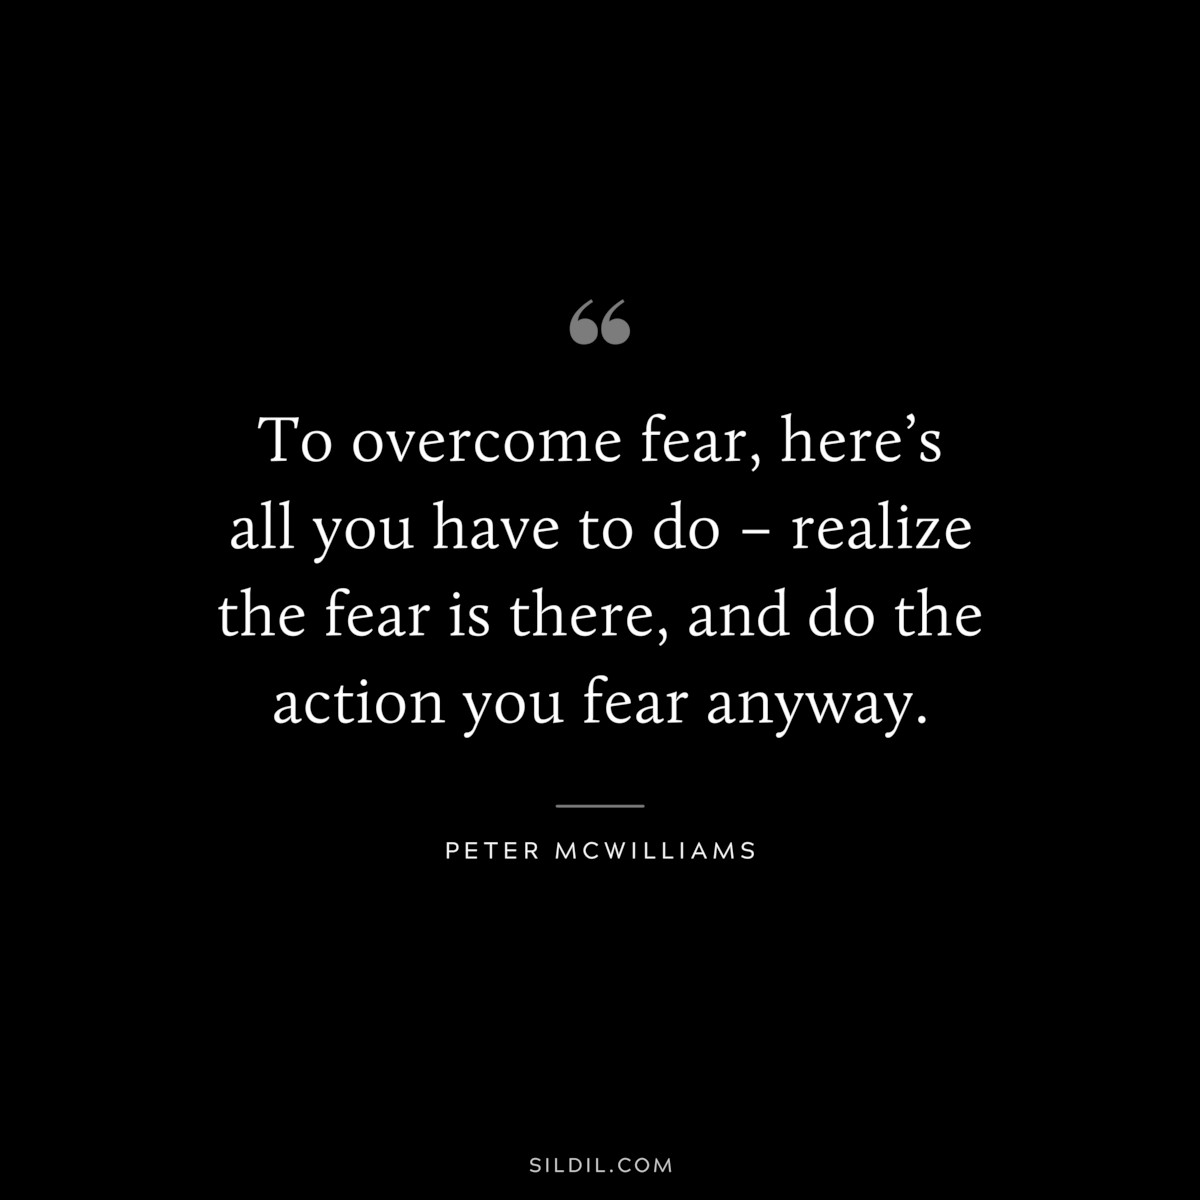 To overcome fear, here’s all you have to do – realize the fear is there, and do the action you fear anyway. ― Peter McWilliams